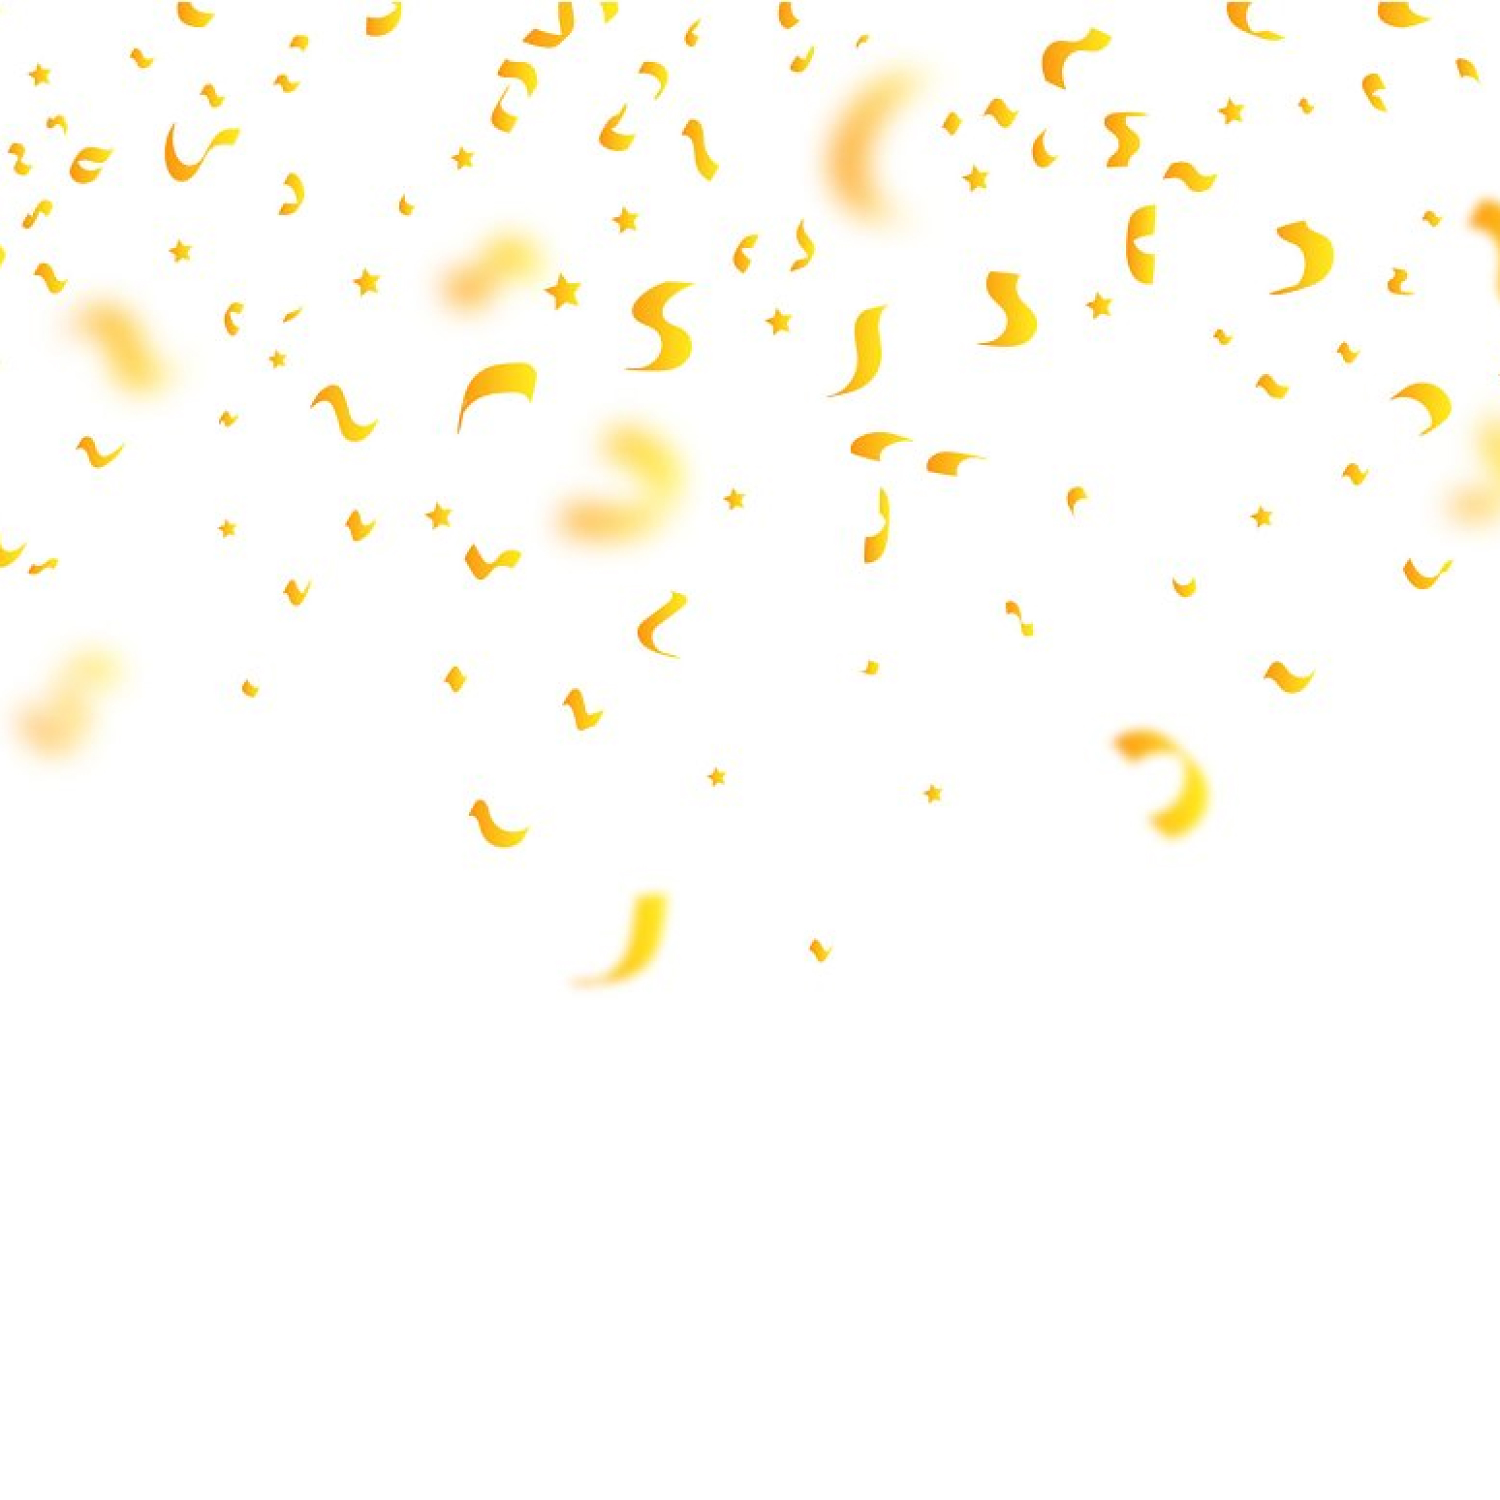 Golden Confetti Falling with Stars cover.